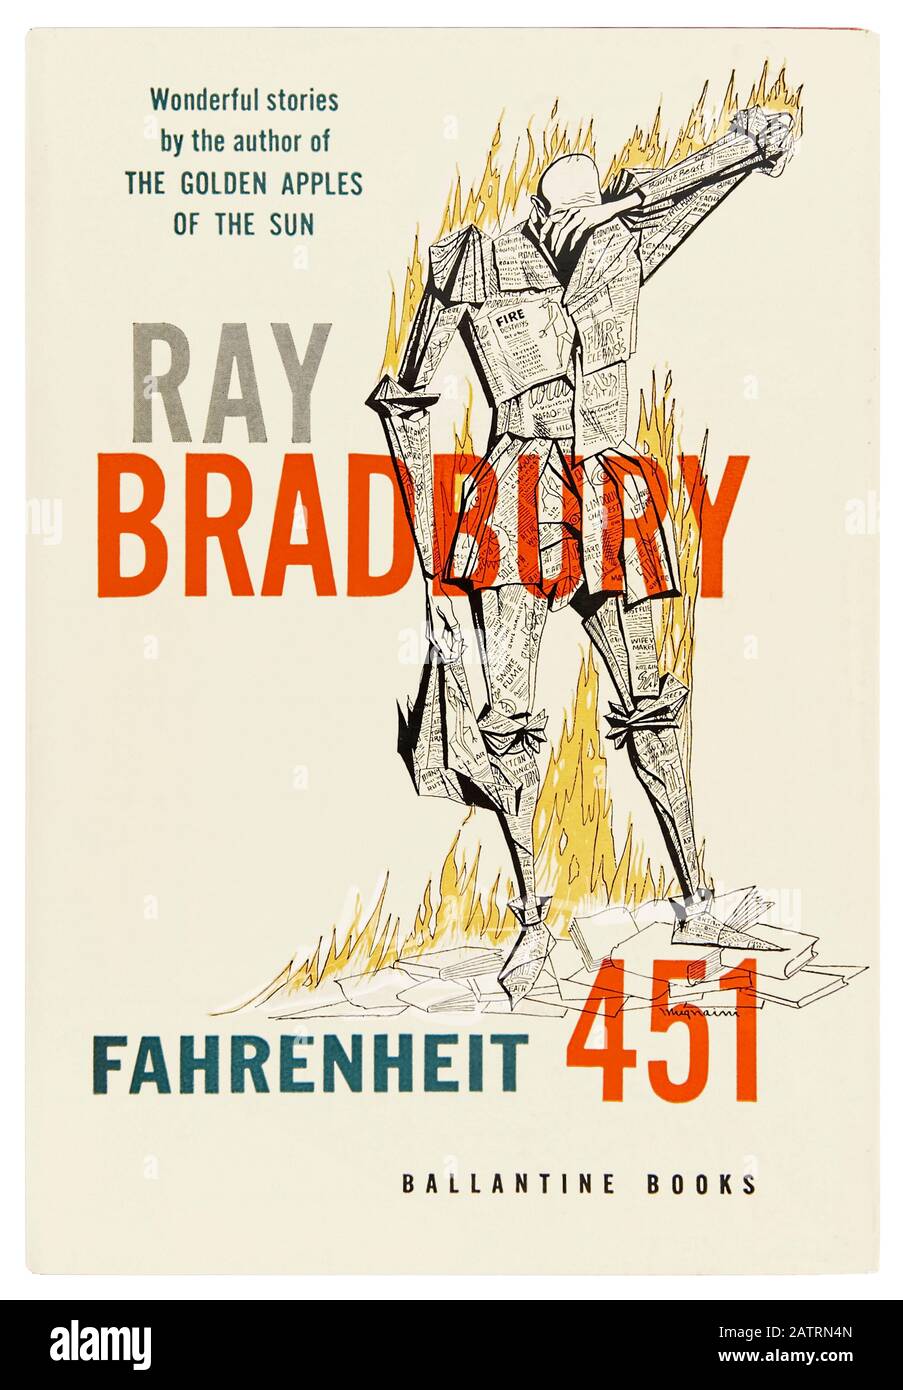 Fahrenheit 451 by Ray Bradbury (1920-2012), a dystopian novel about Guy Montag, a fireman in a society where books are outlawed and destroyed by firemen. Photograph of 1953 first edition front cover featuring an illustration by Joe Mugnaini (1912-1992). Stock Photo